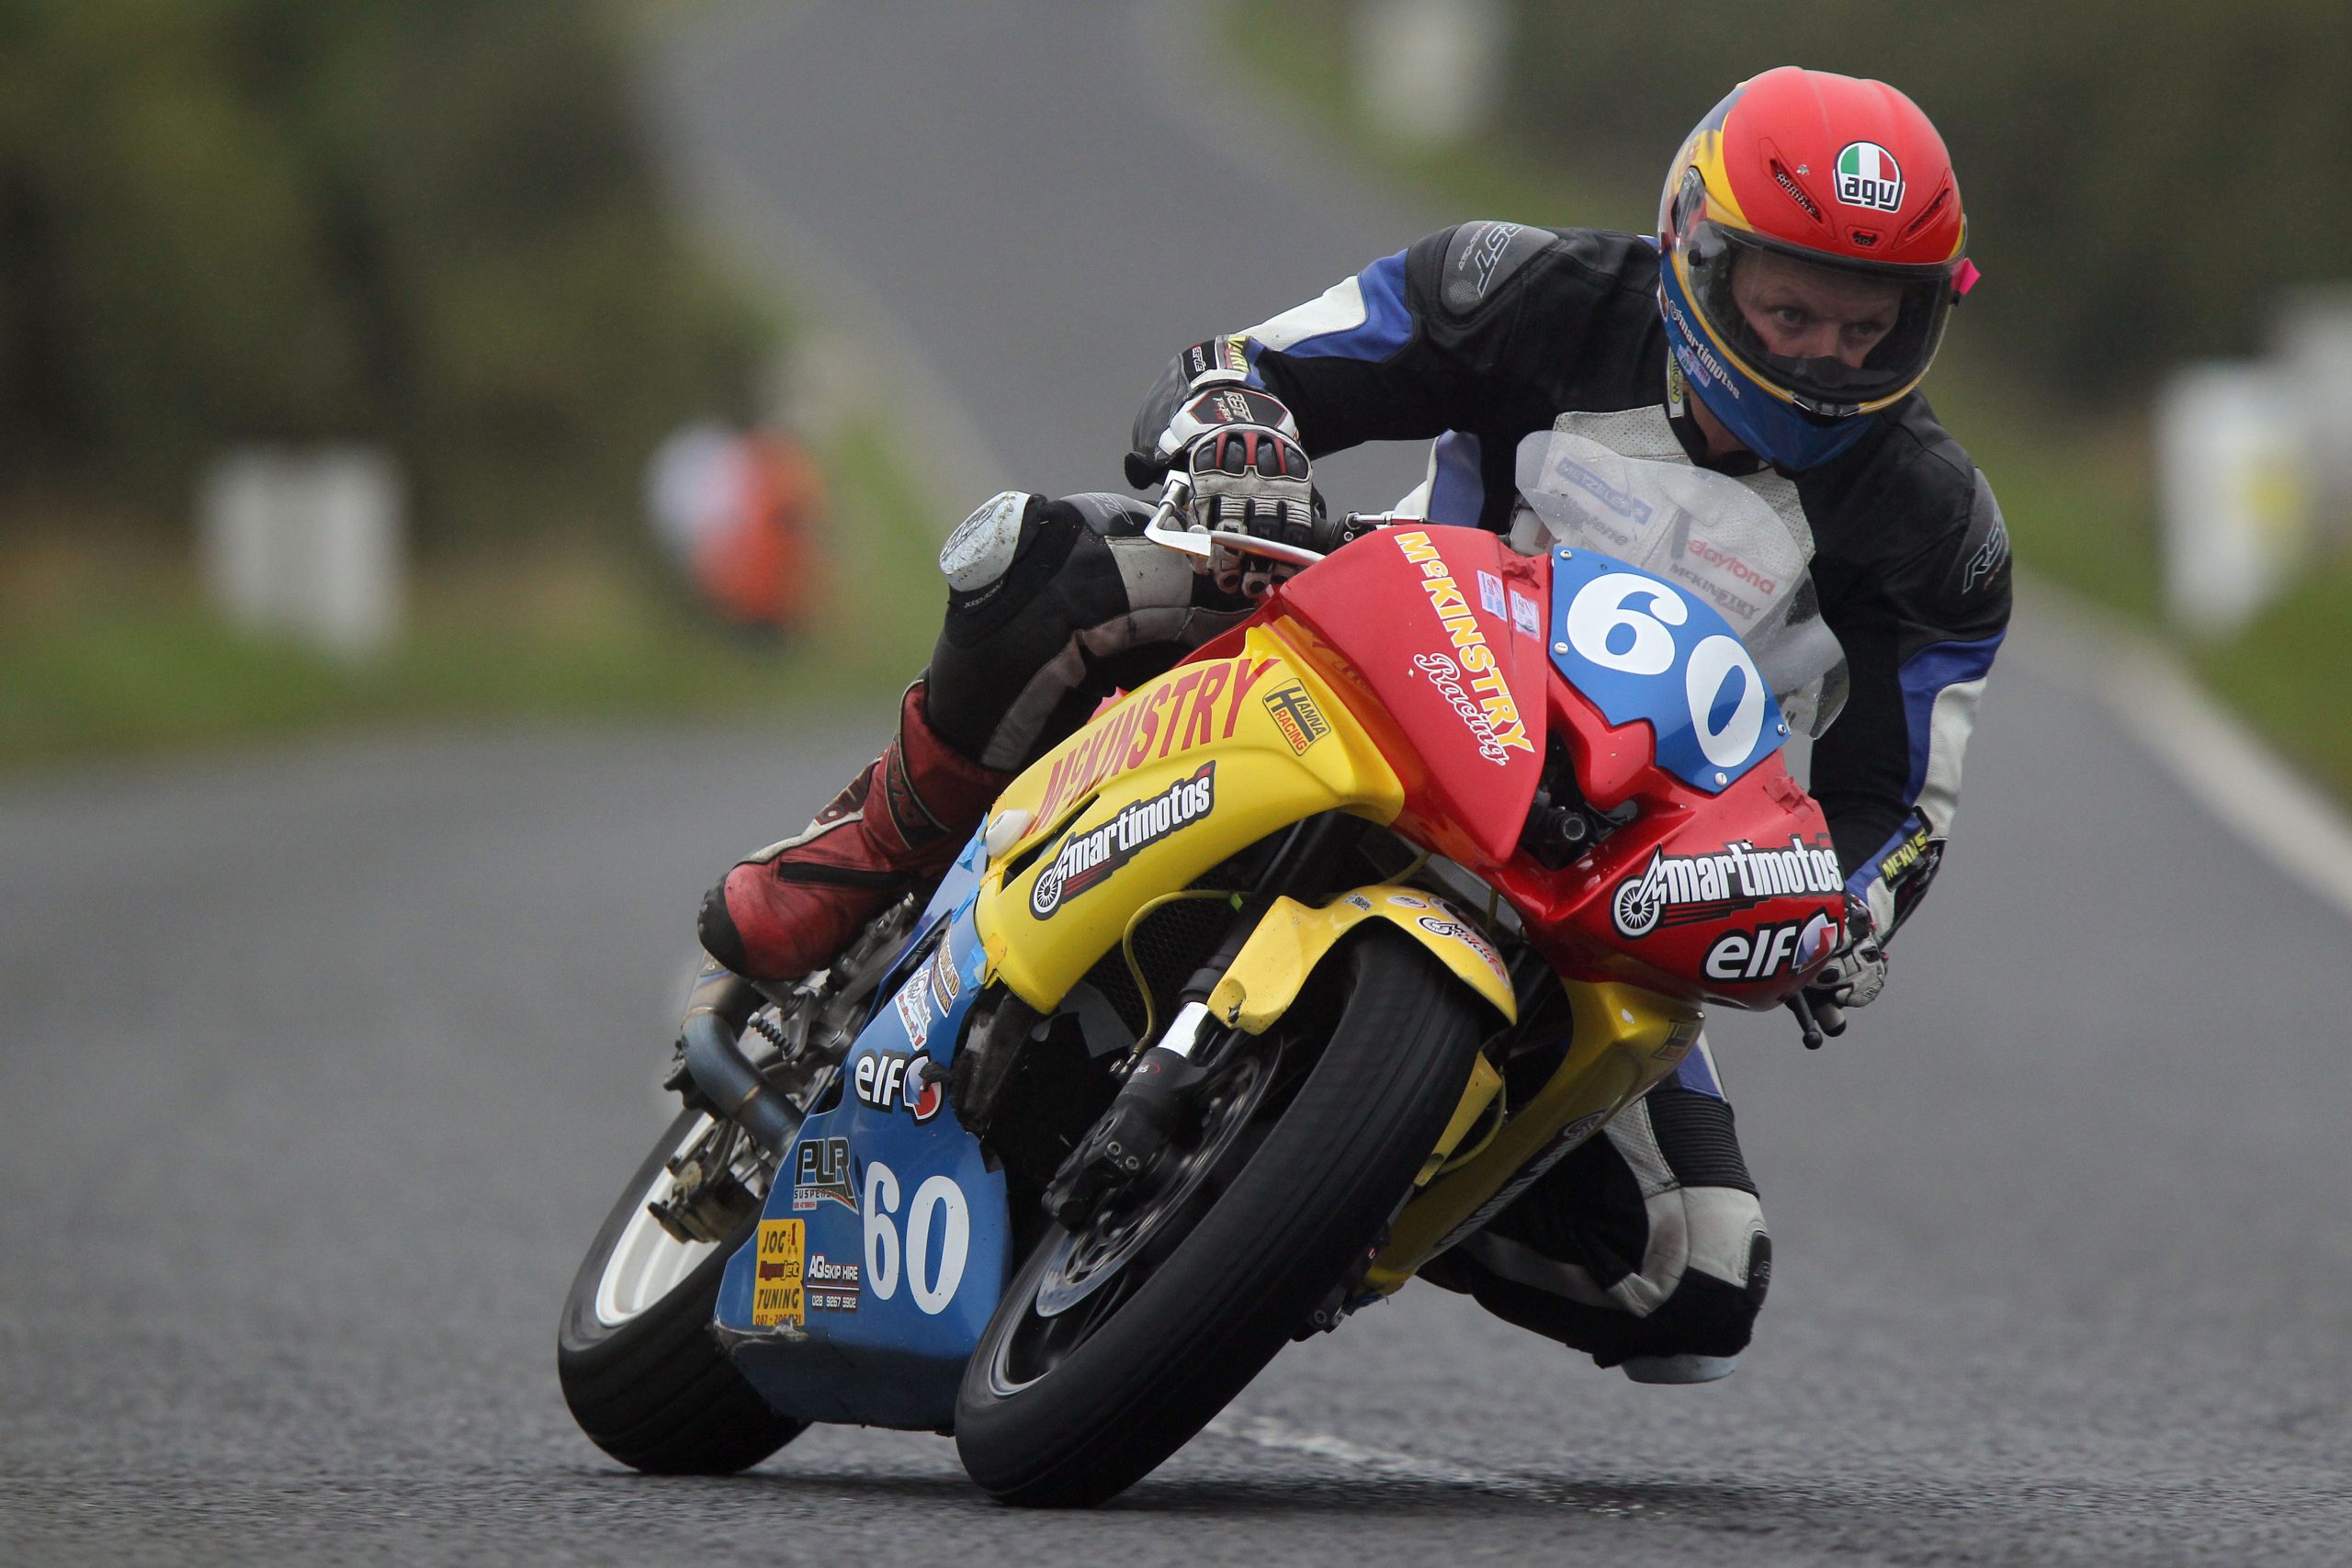 Ivan Lintin on his way to his second Ulster GP victory in 2014 image by by Pacemaker Press International